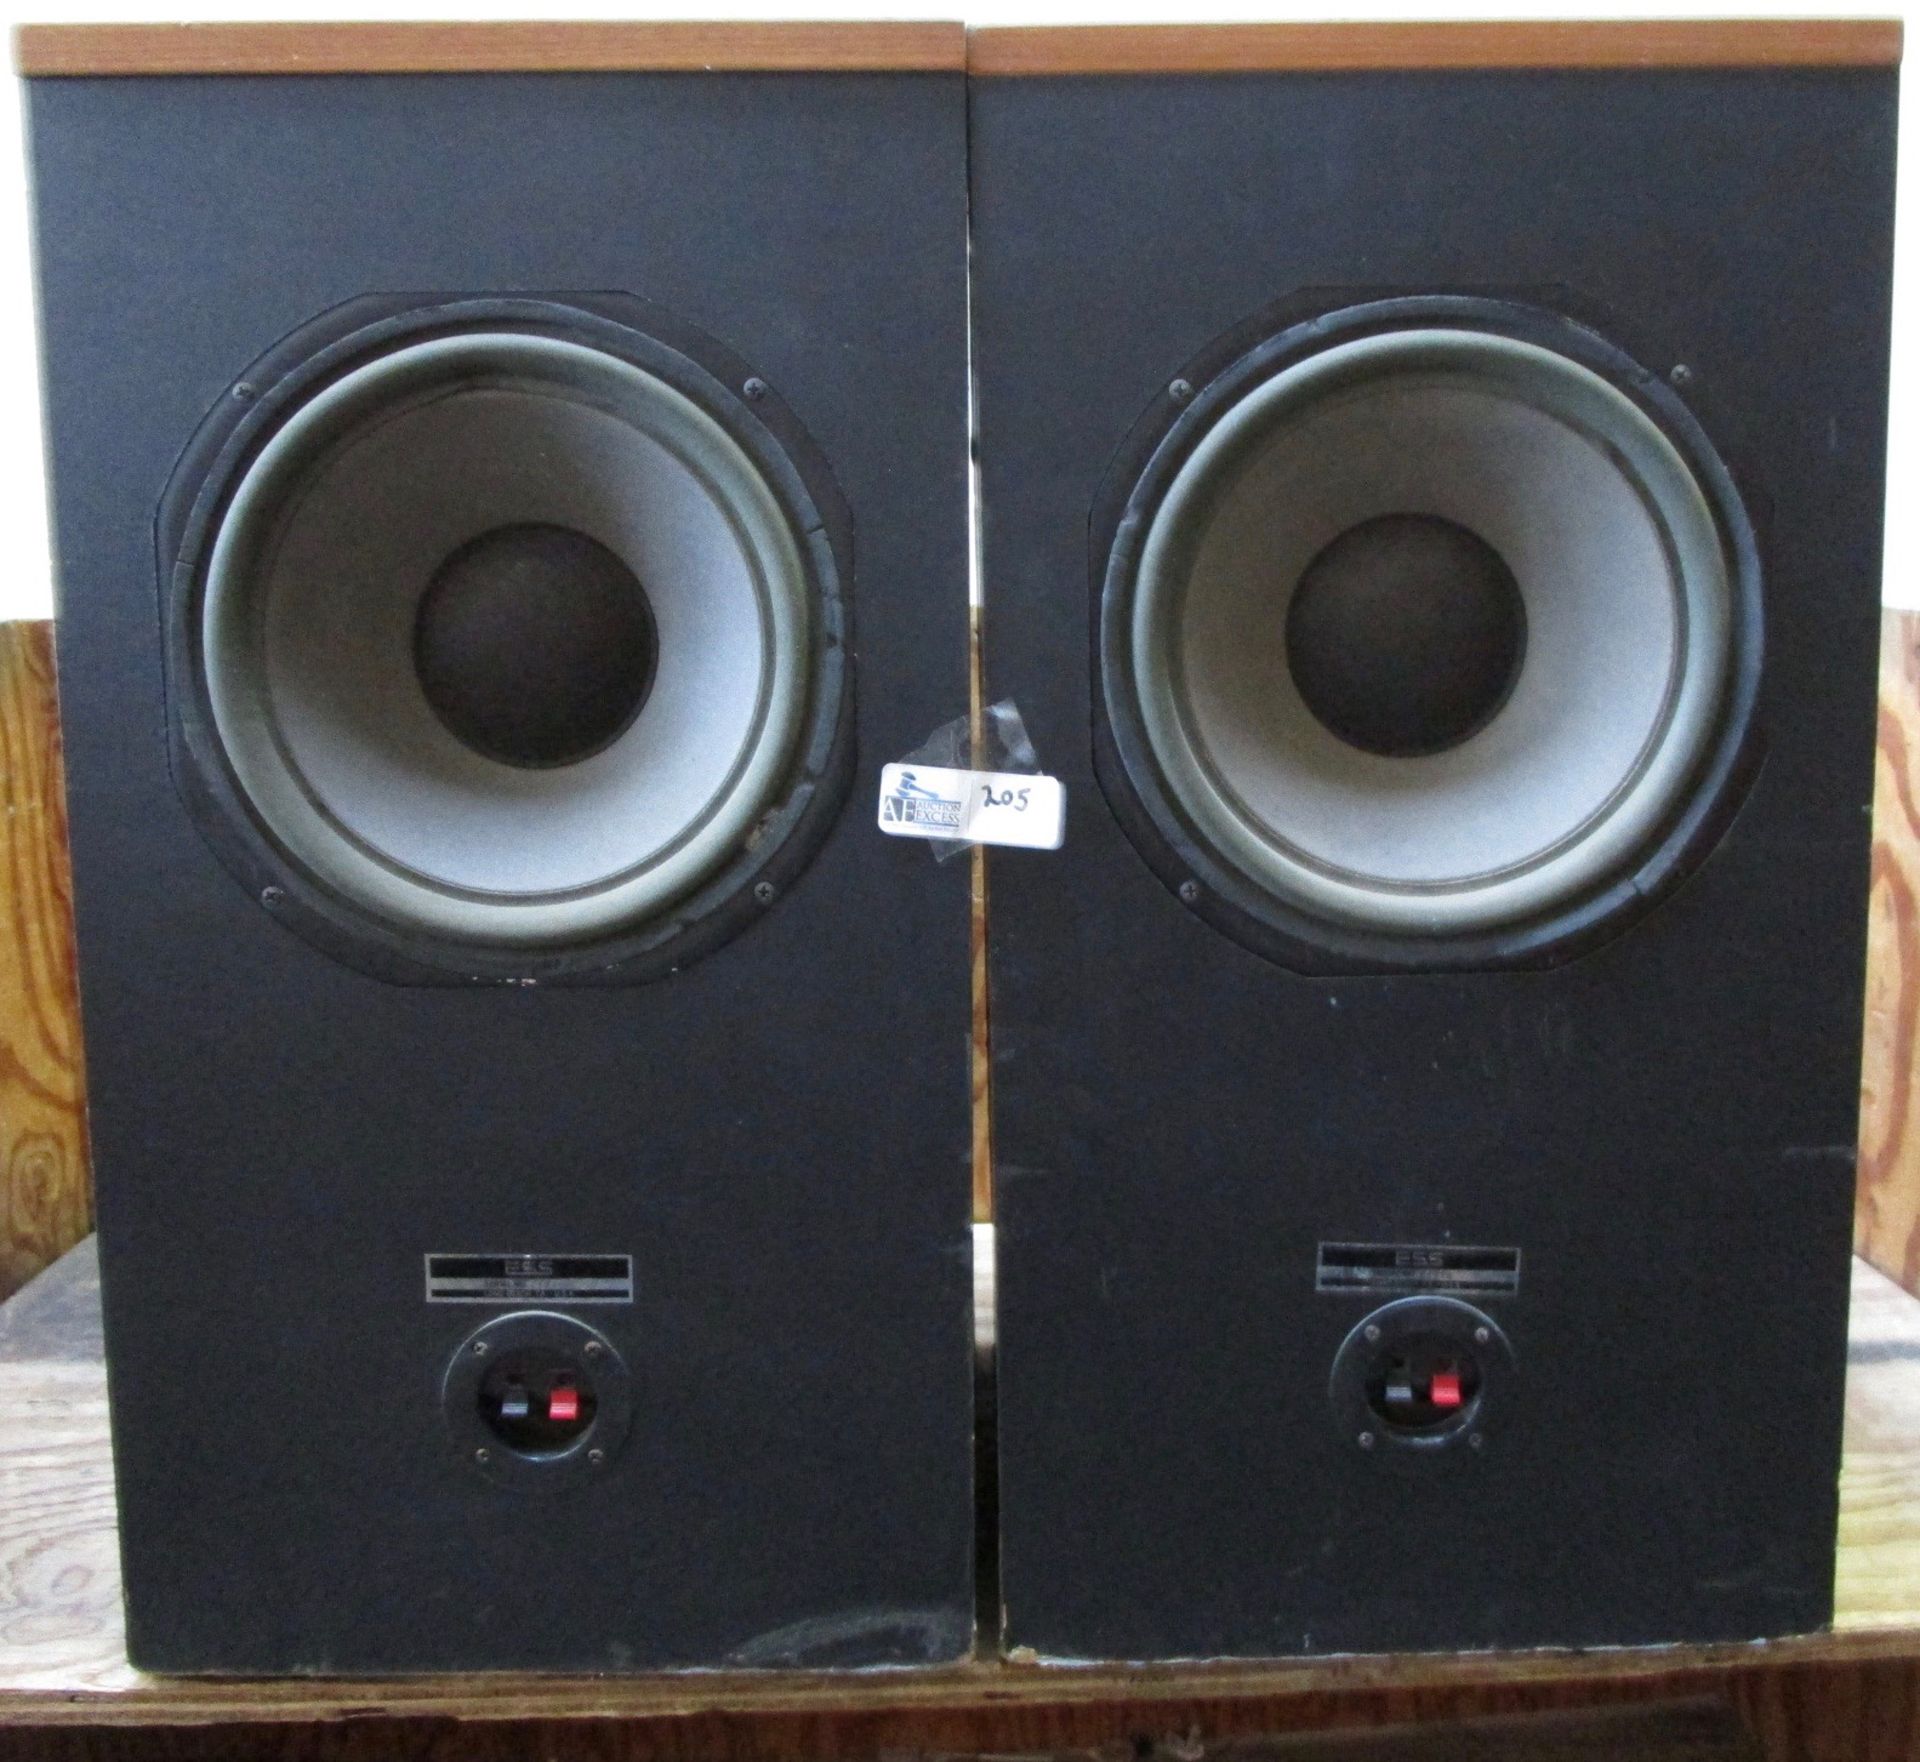 LOT OF 2 ESS PS1020 BRILLIANCE SPEAKERS - Image 3 of 4